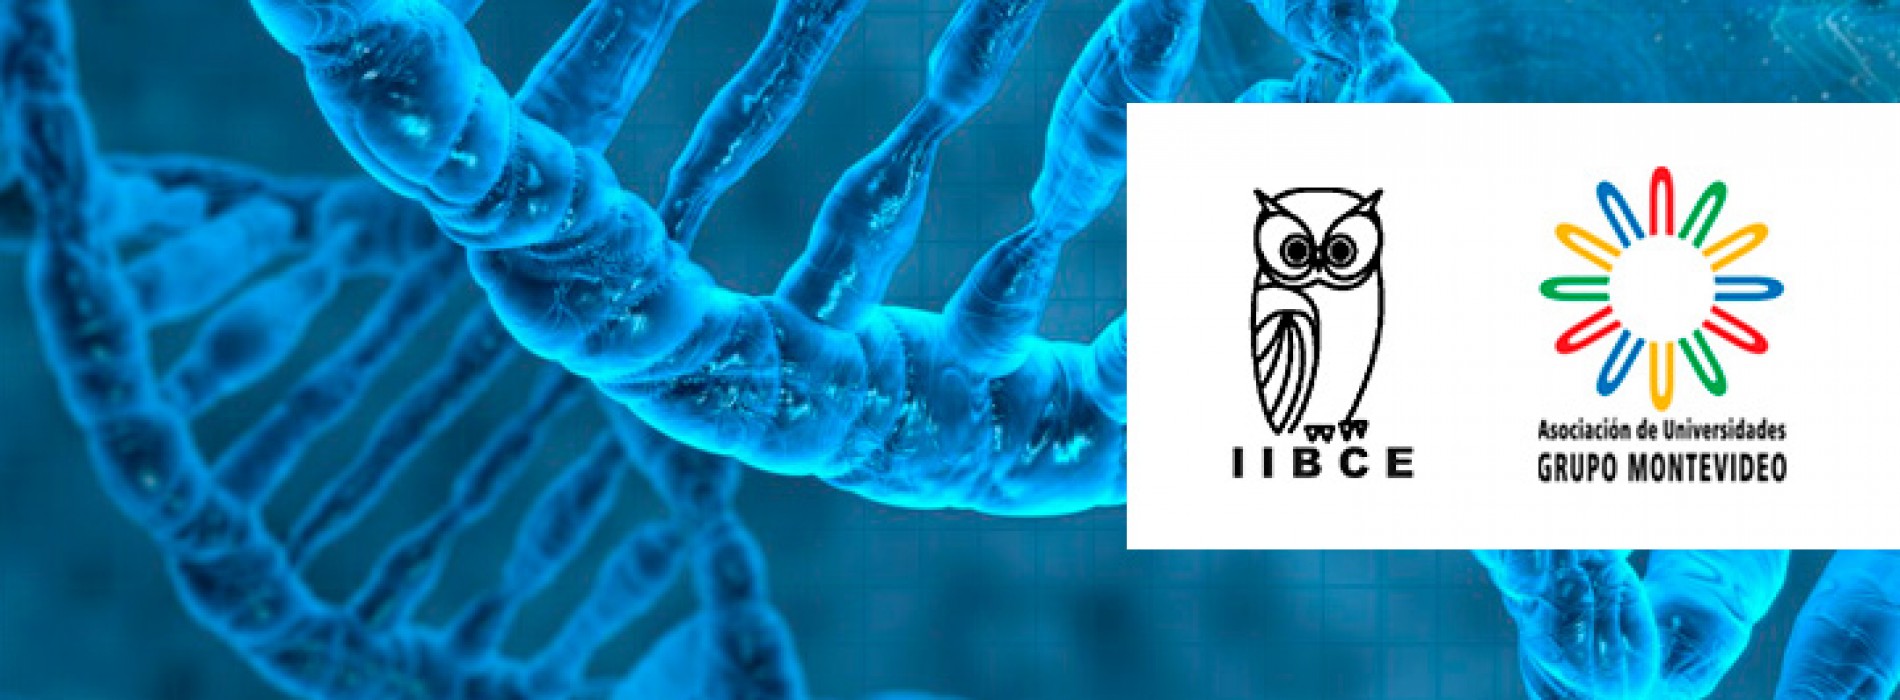 Scholarships for master's and doctoral students for the course Advanced School on Molecular and Cell Biology to Unravel the Physiology of Diverse Biological Paradigms - Convention IIBCE AUGM